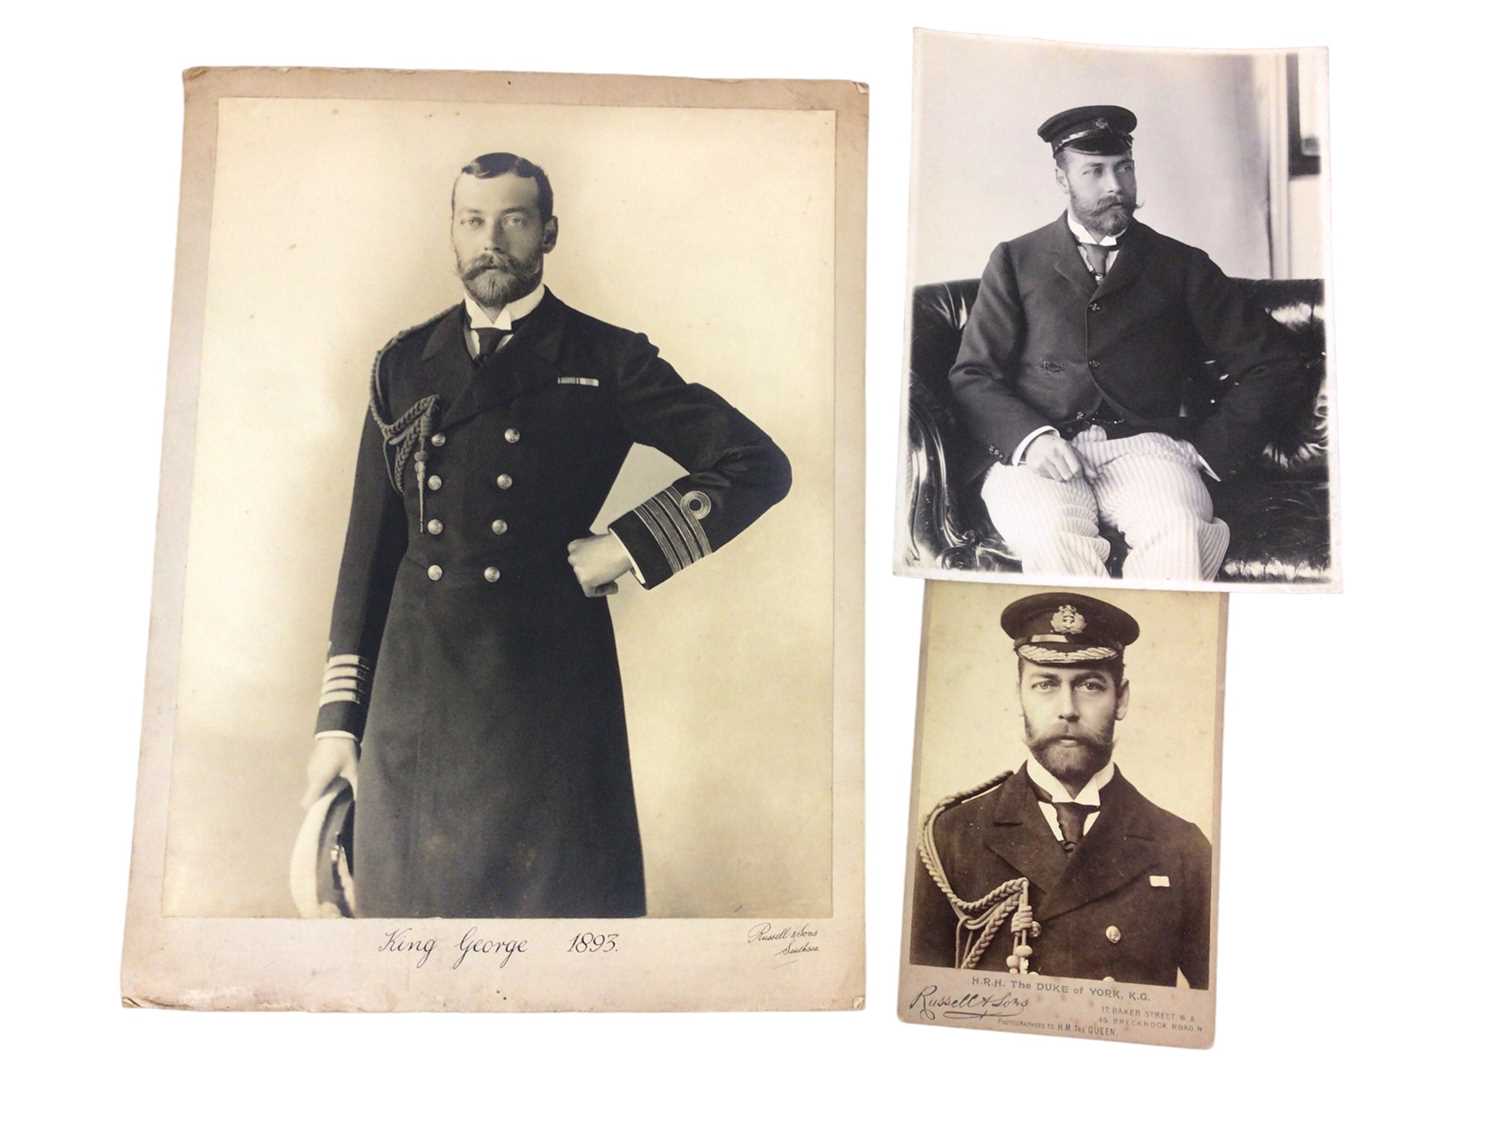 Lot 47 - H.R.H. Prince George Duke of York (later H.M.King George V), three fine portrait photographs taken in the 1890s including the Prince in yachting attire (3) Provenance: the Russel & Sons Court phot...